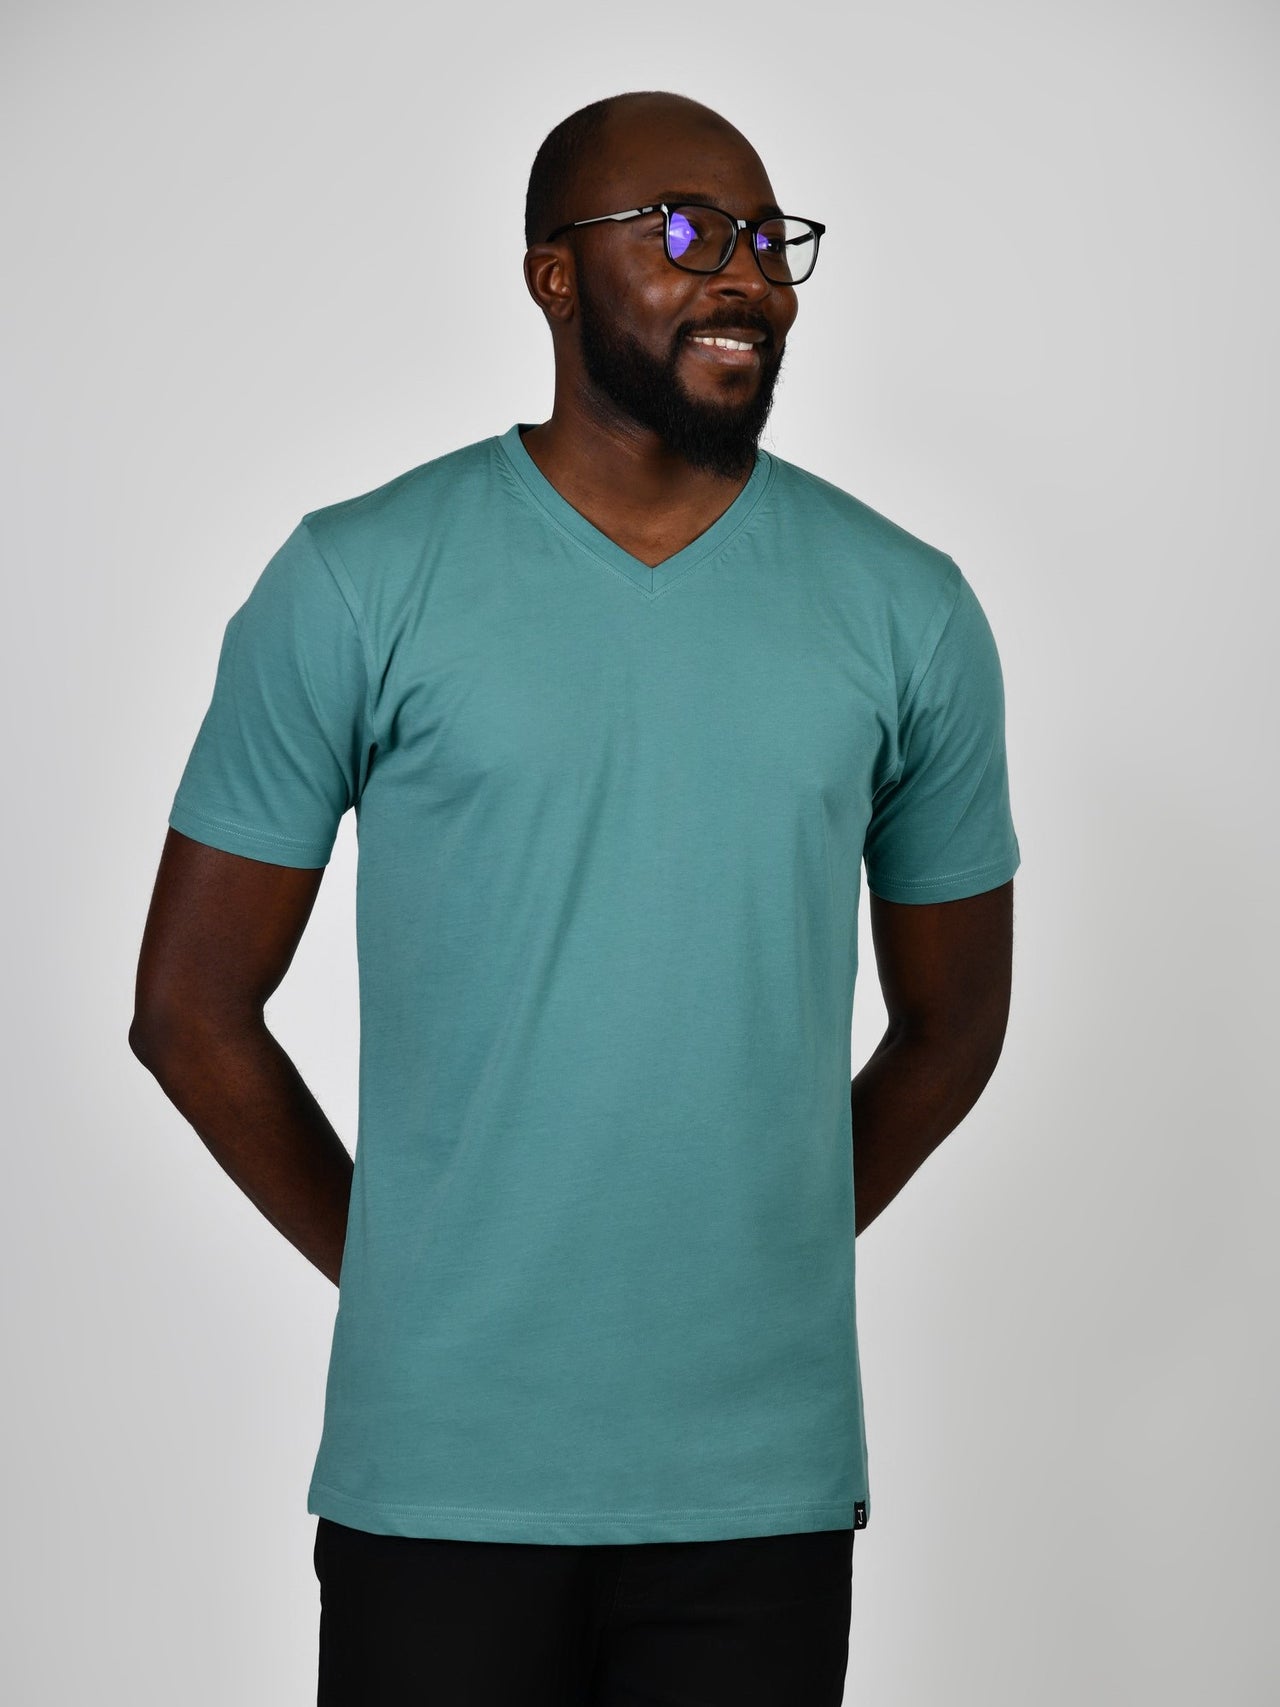 A tall and slim guy in the studio, hands behind back and wearing a teal L tall slim v-neck t-shirt.